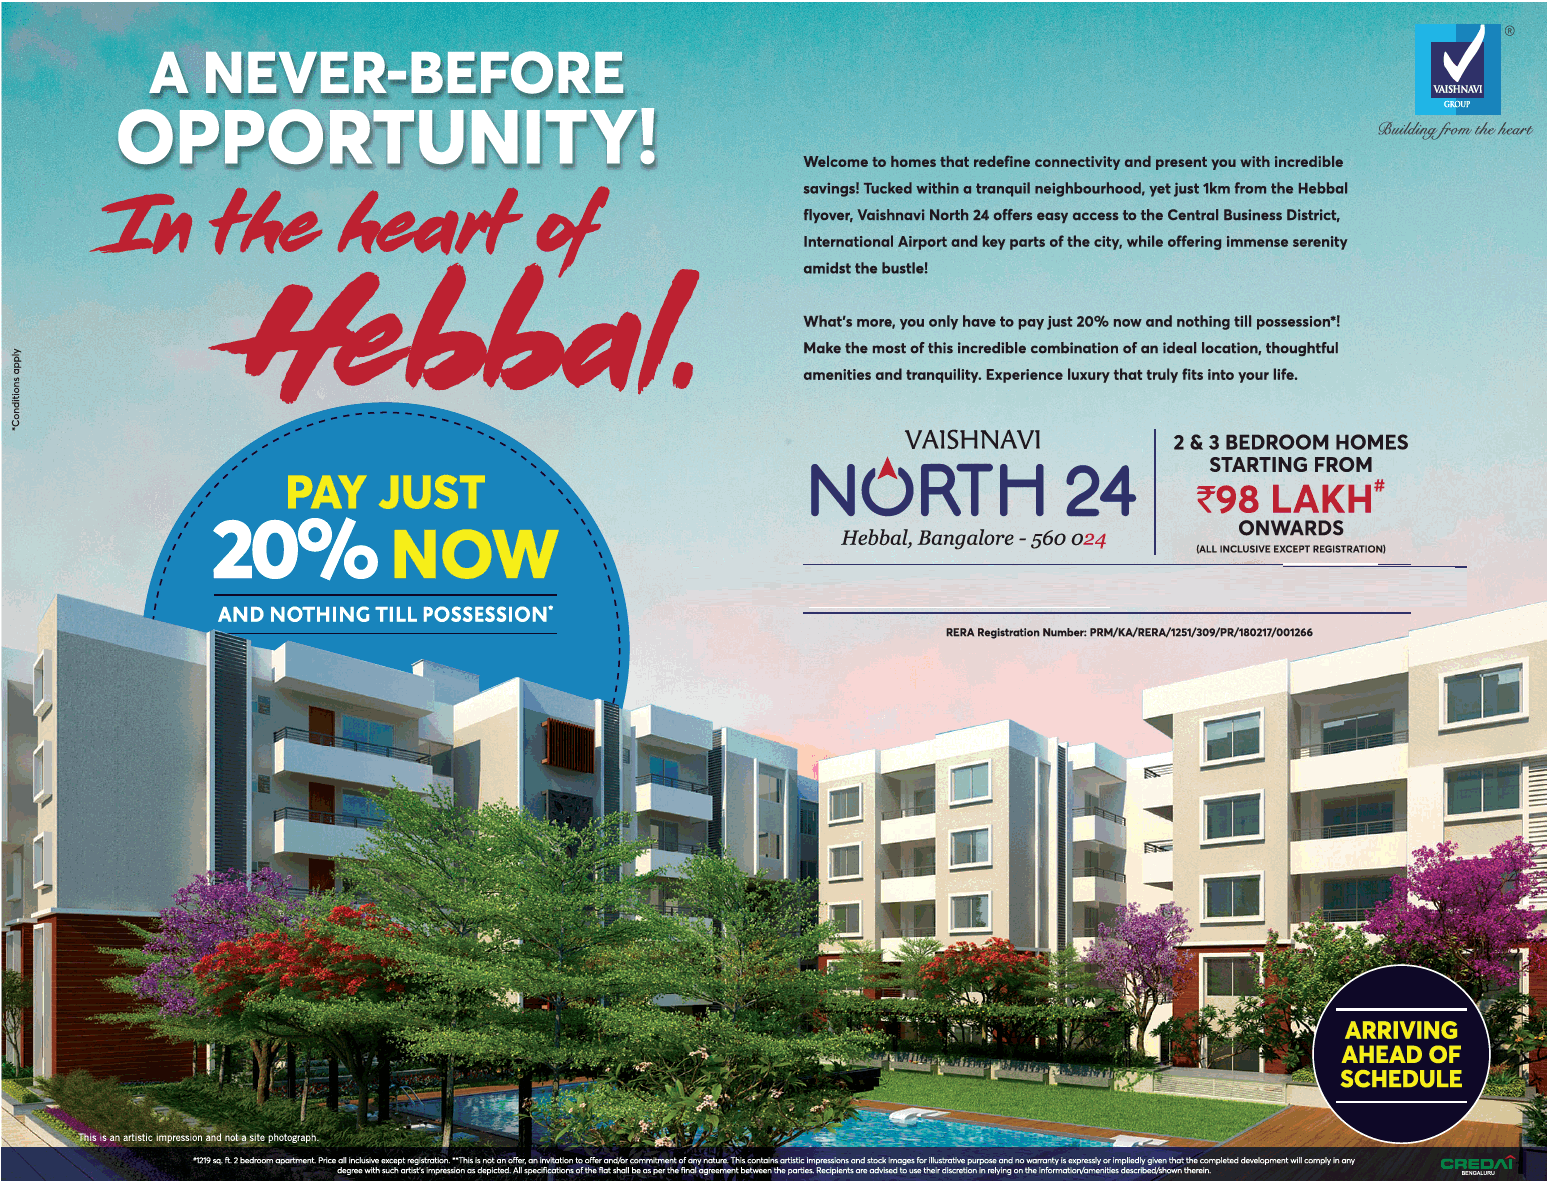 2 and 3 BHK starting from Rs 98 Lakh onwards at Vaishnavi North 24 in Bangalore Update